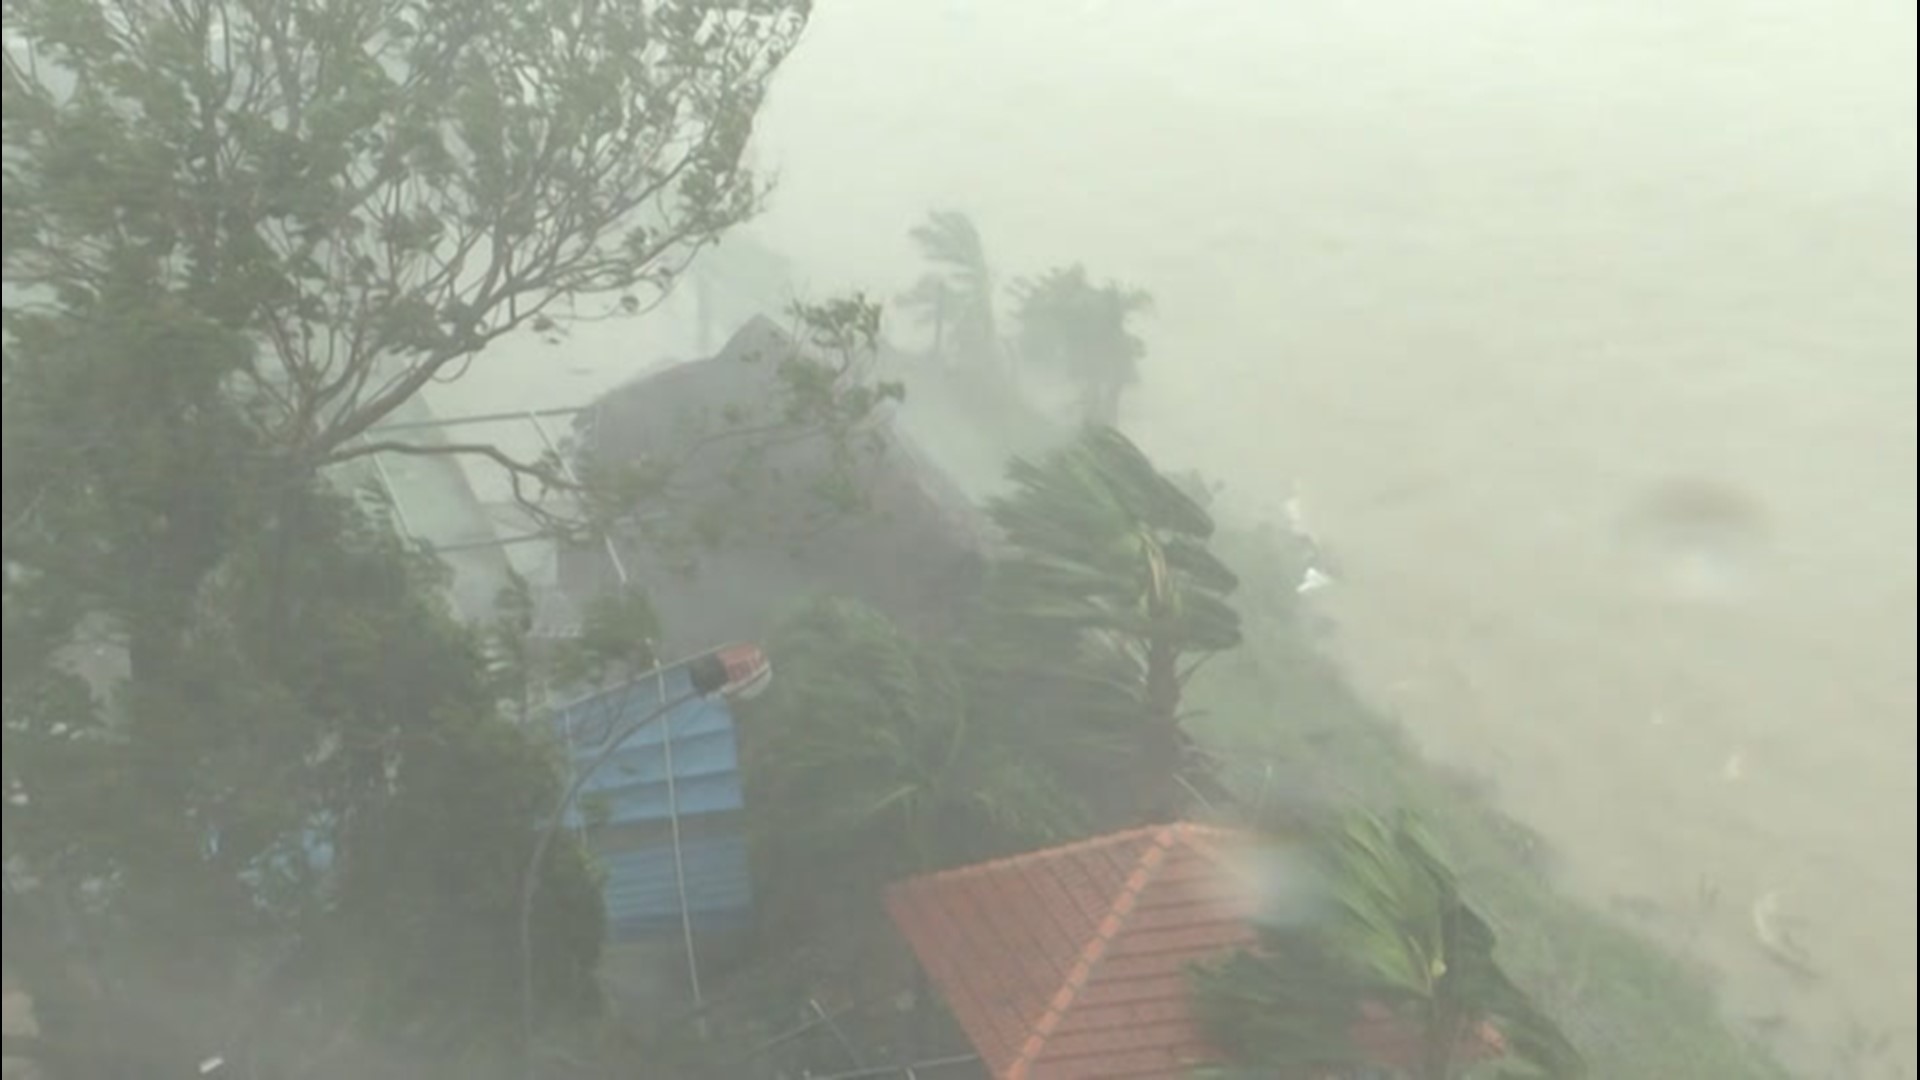 As Tropical Storm Molave swept through Quang Ngai, Vietnam, on Oct. 28, powerful winds and rain blasted the area. As many as 500,000 were people evacuated ahead of the storm.